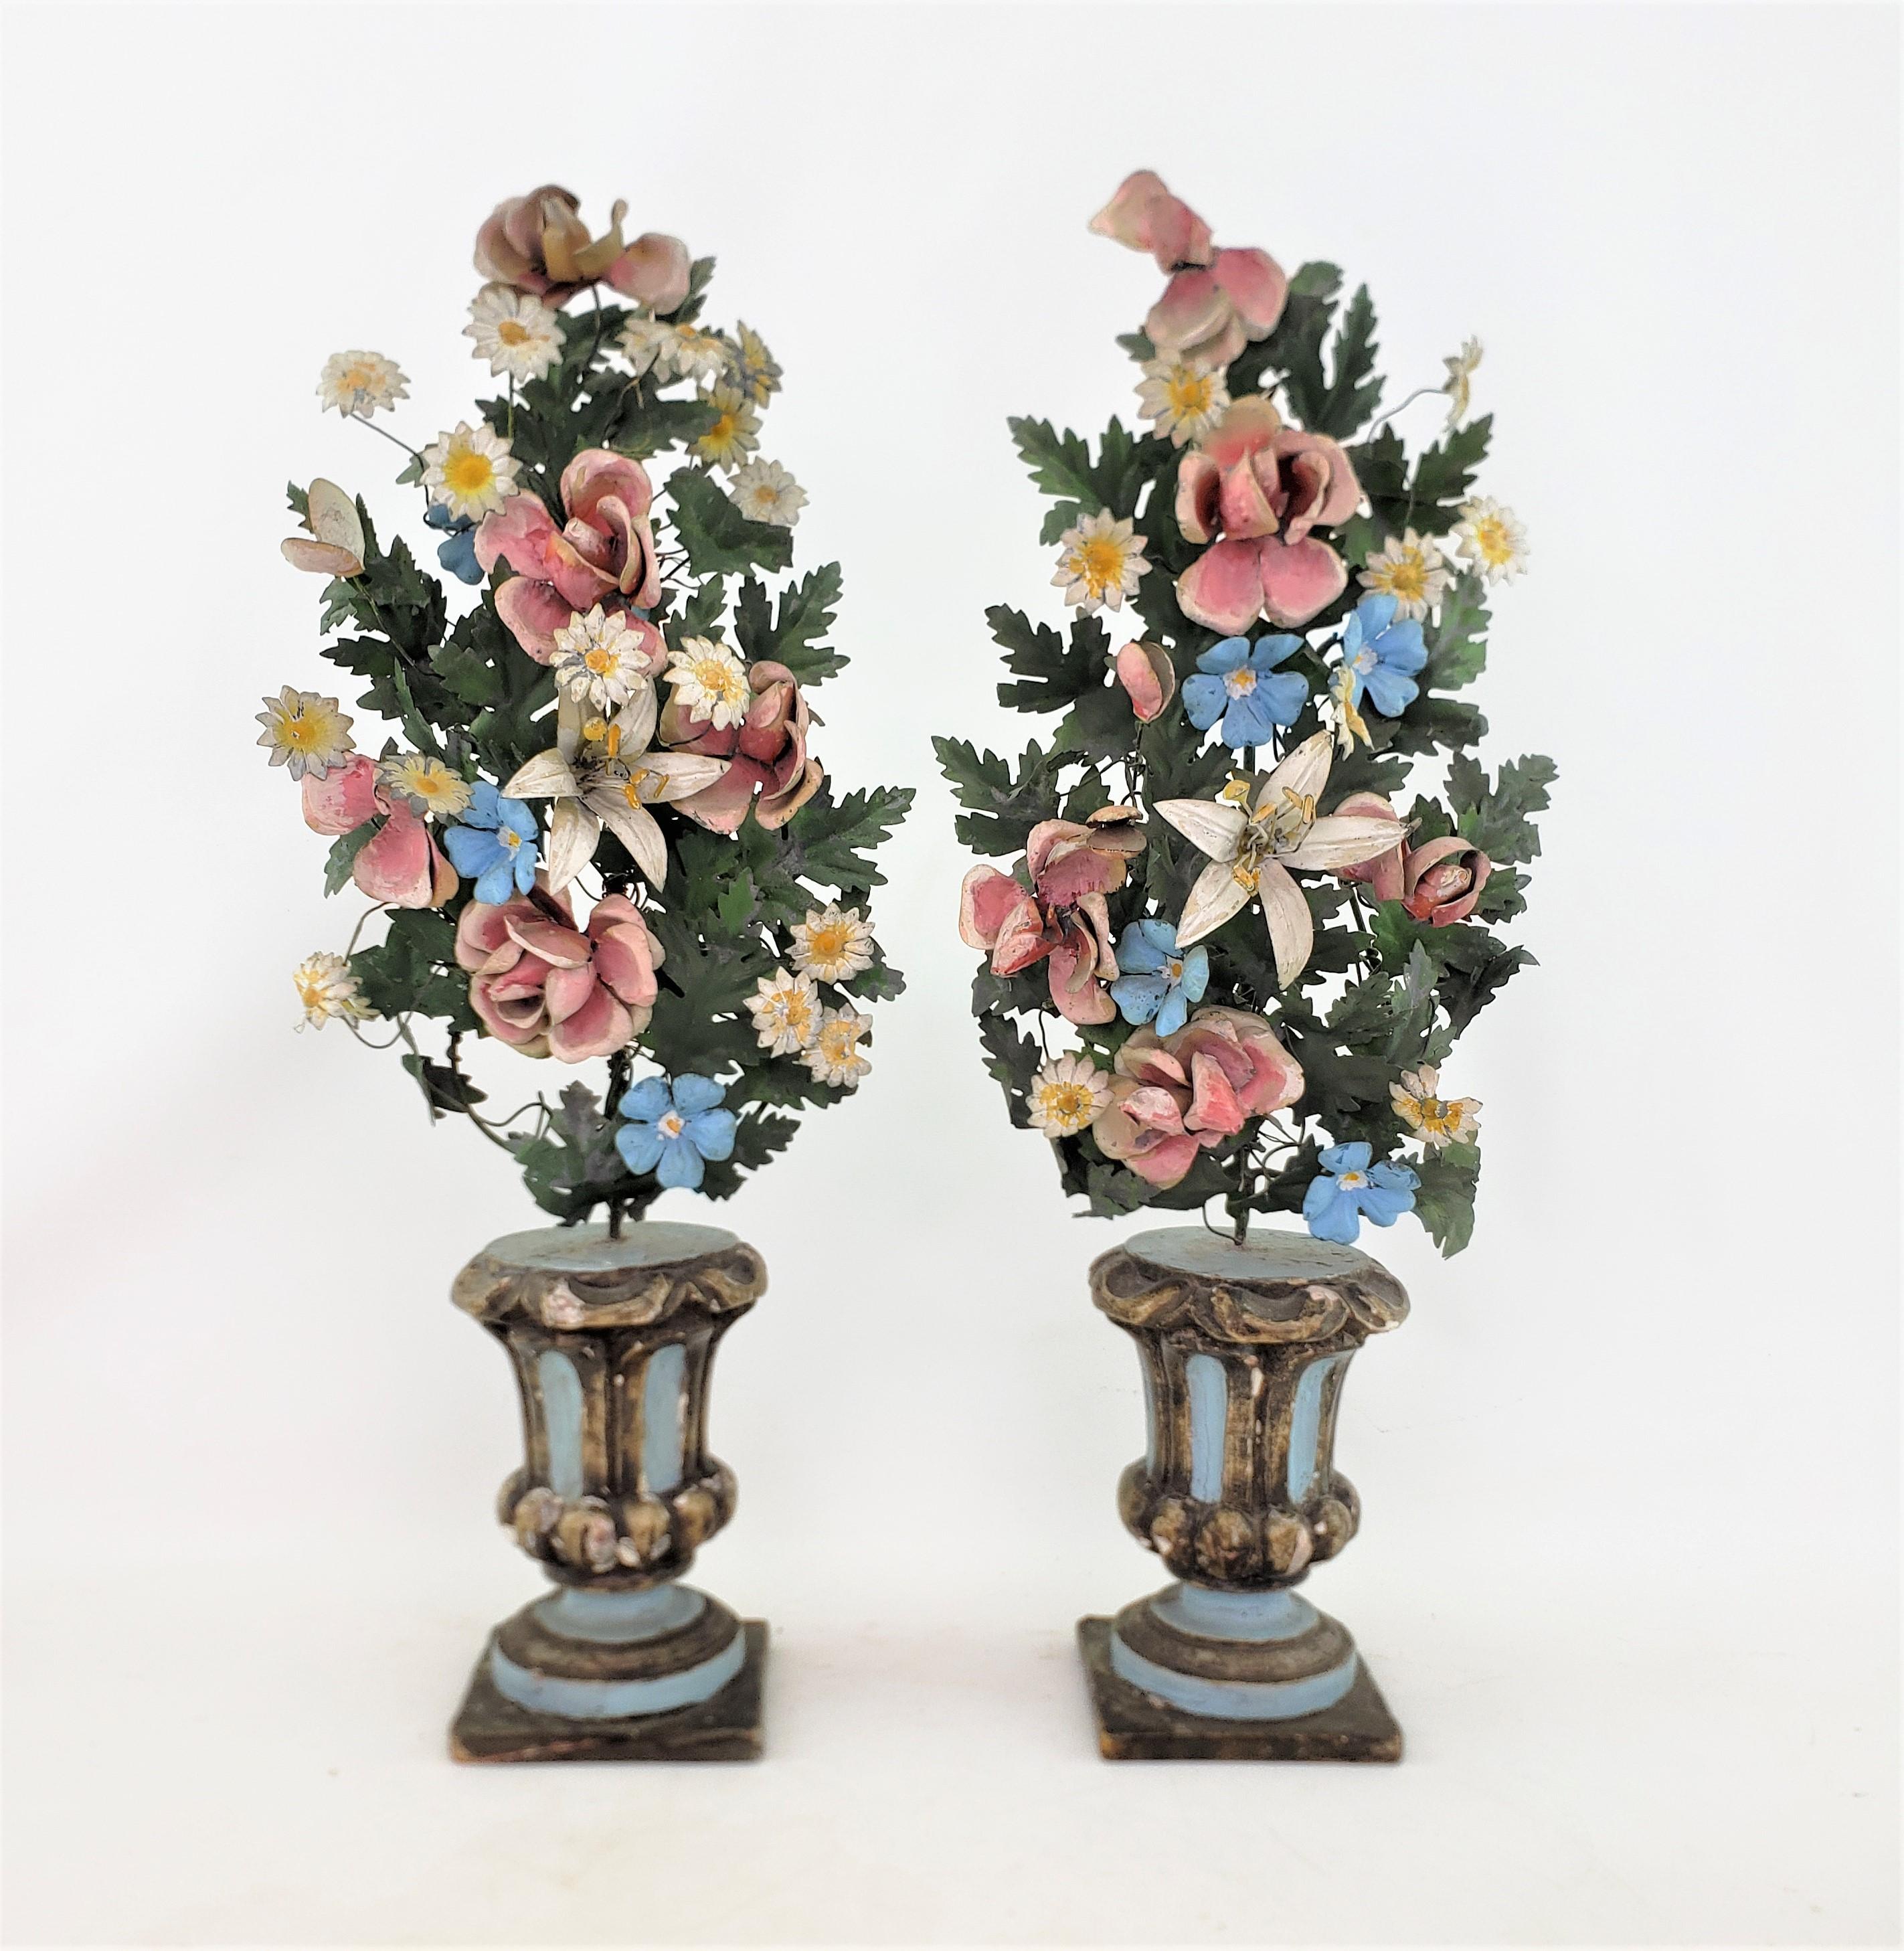 This pair of antique toleware bouquet sculptures are branded on the bases by an unknown maker, and date to approximately 1880 and originate from France. The bases are done in pine with a blue pastel painted finish. The bouquets are done with tin and